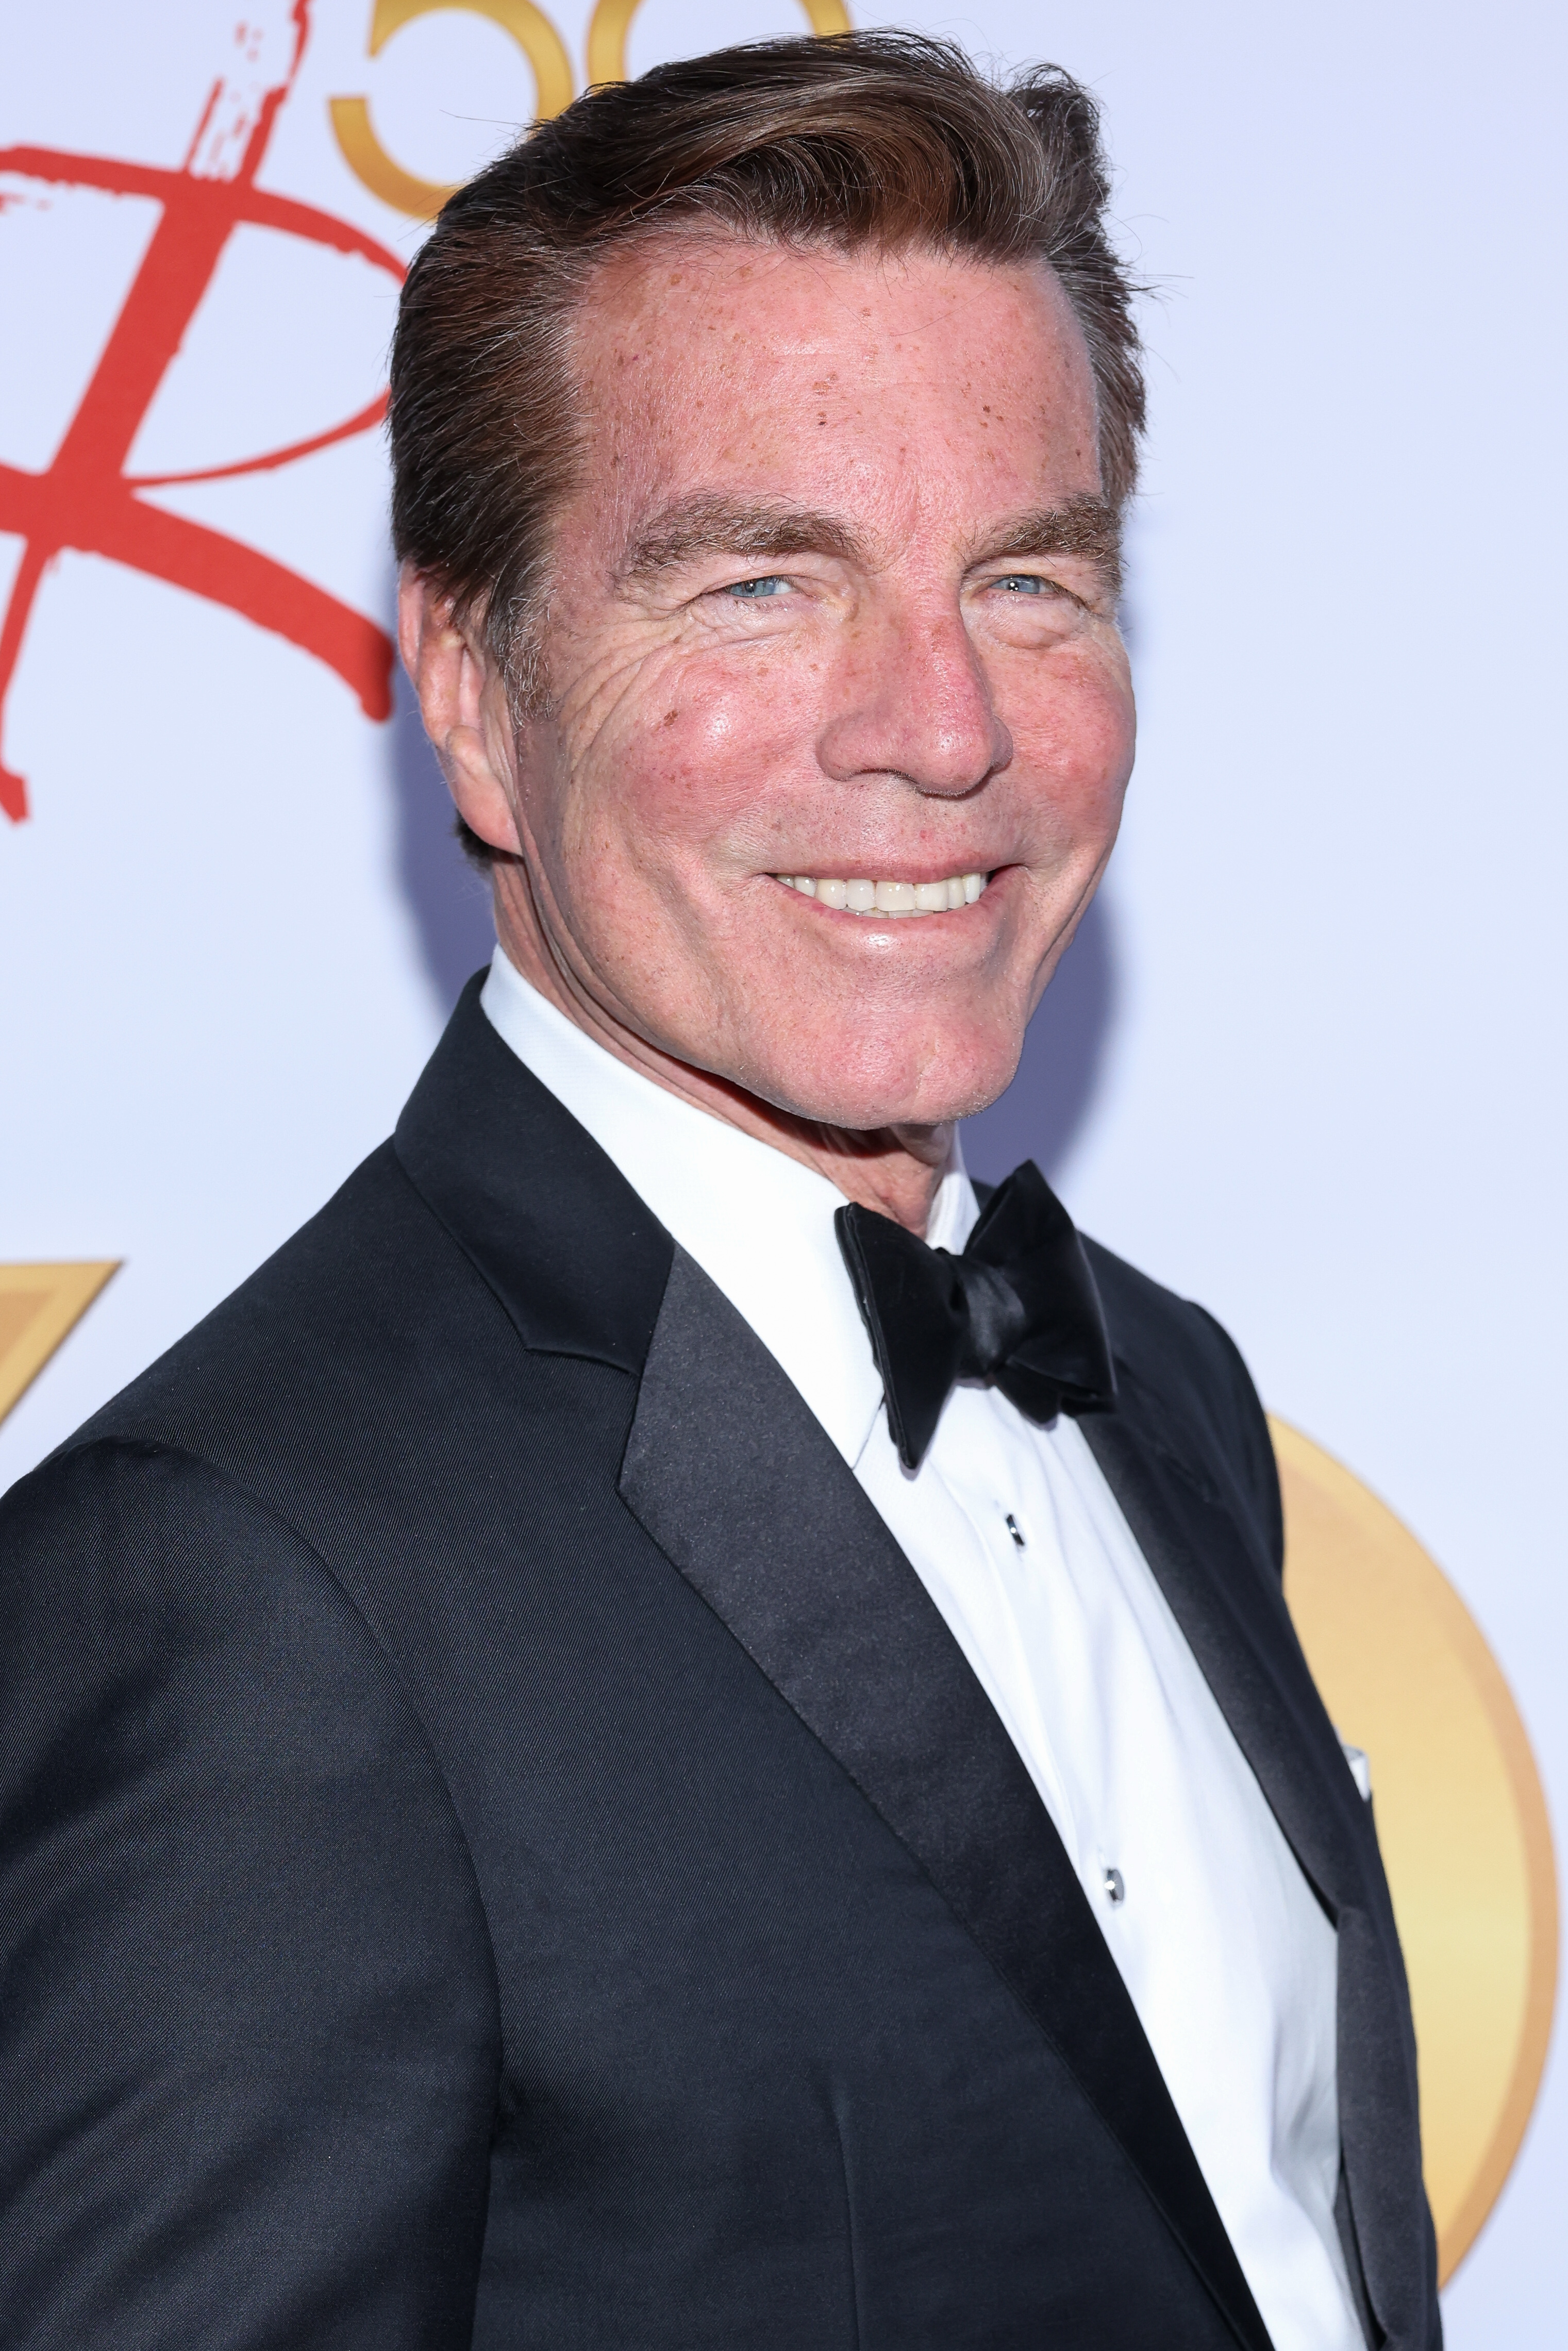 Peter Bergman at the 50th anniversary of "The Young and The Restless" on March 17, 2023 in Los Angeles, California | Source: Getty Images